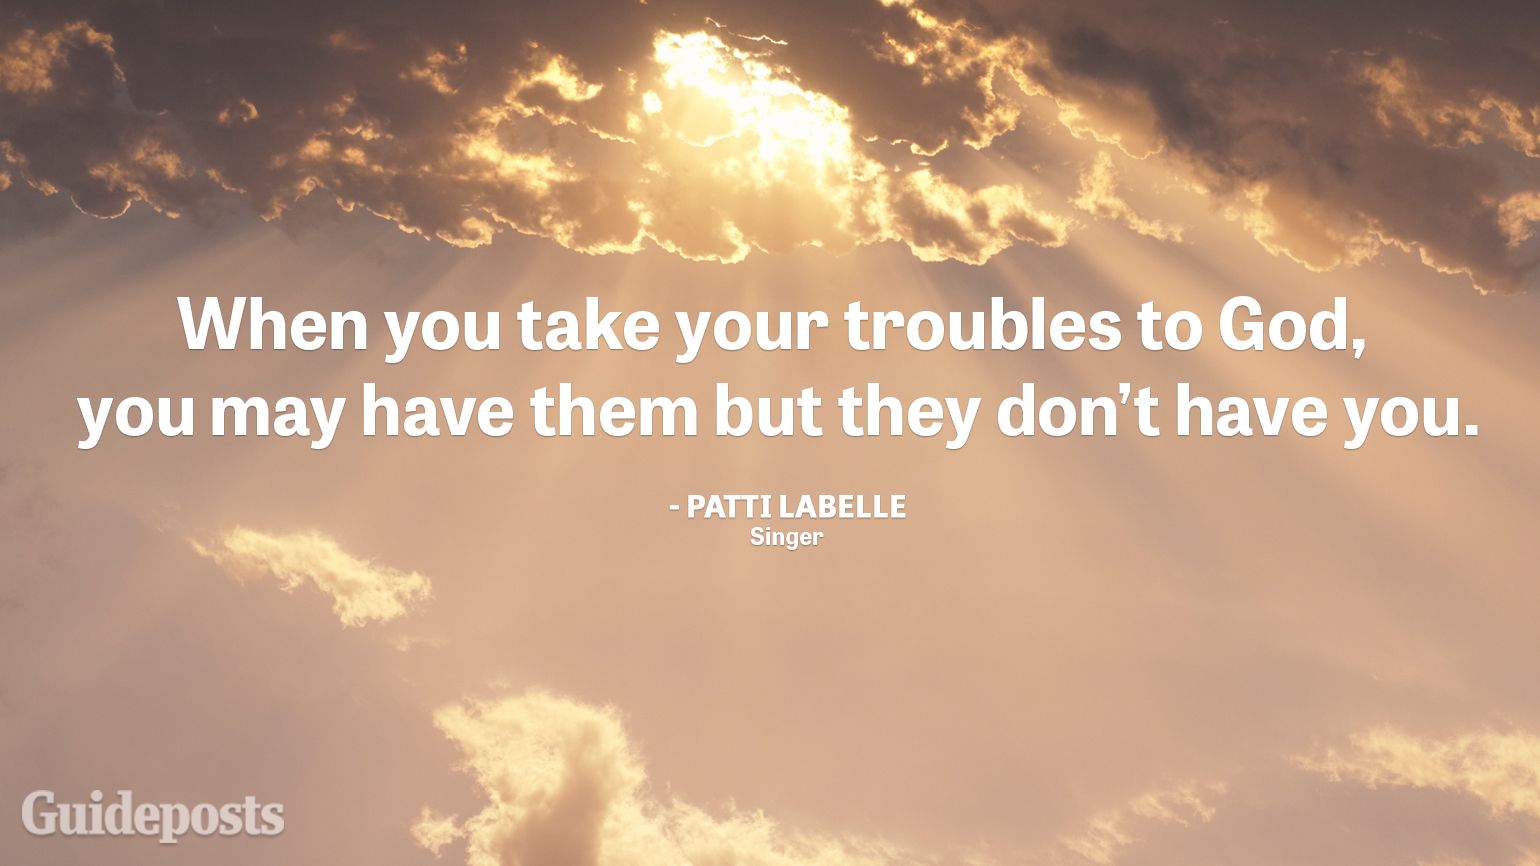 When you take your troubles to God, you may have them but they don't have you.